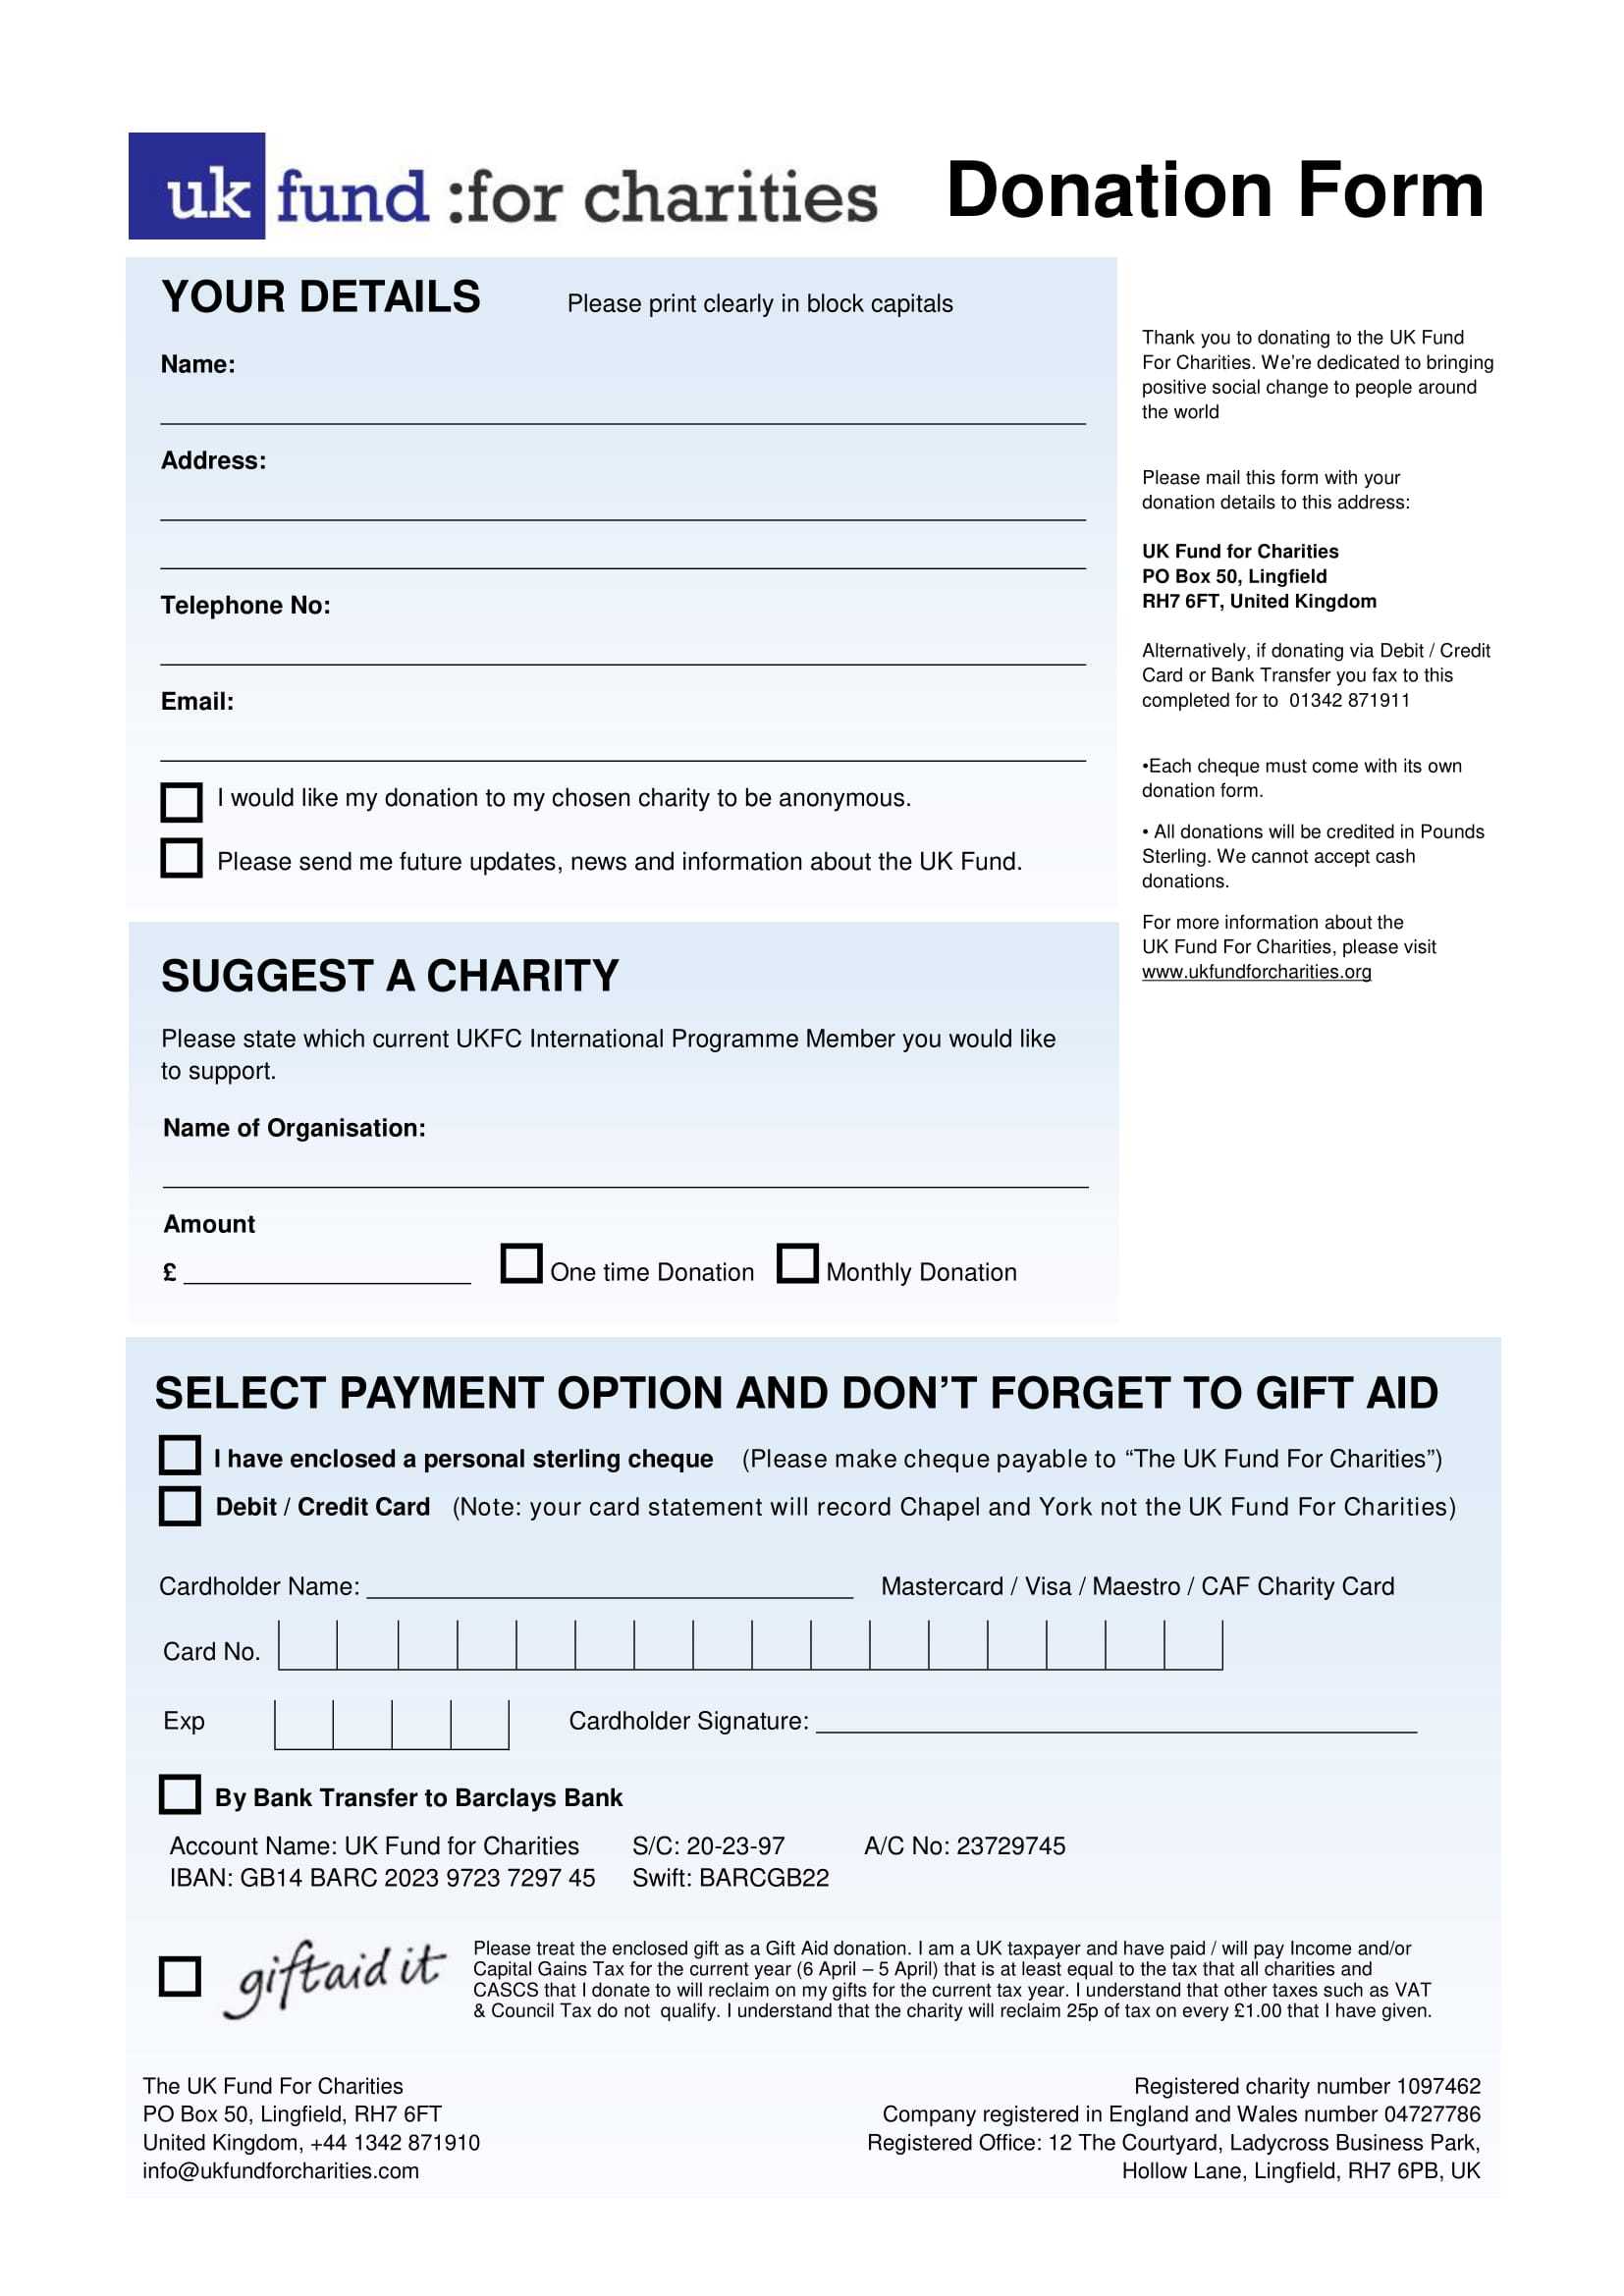 free-5-charity-donation-forms-in-pdf-ms-word-regarding-organ-donor